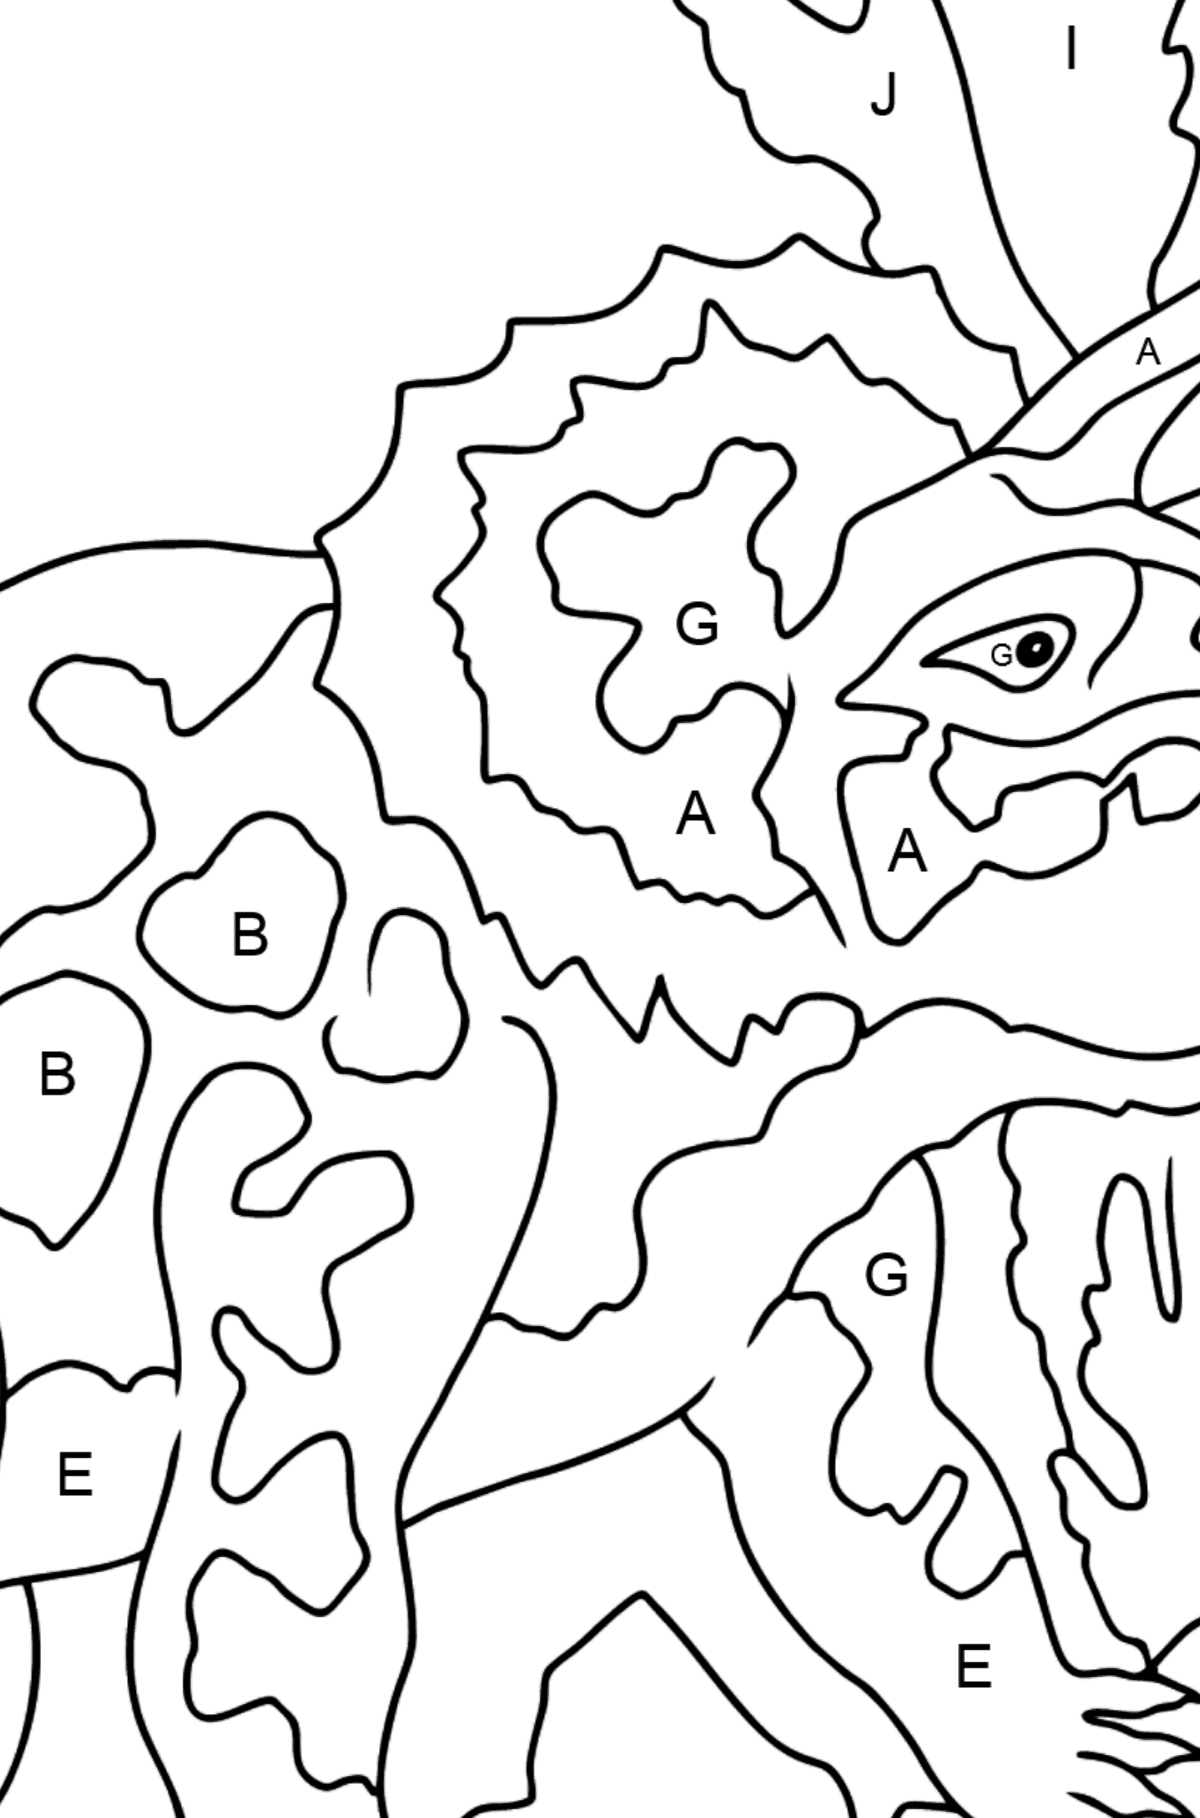 Coloring Page - Triceratops - A Peaceful Horned Dinosaur - Coloring by Letters for Kids